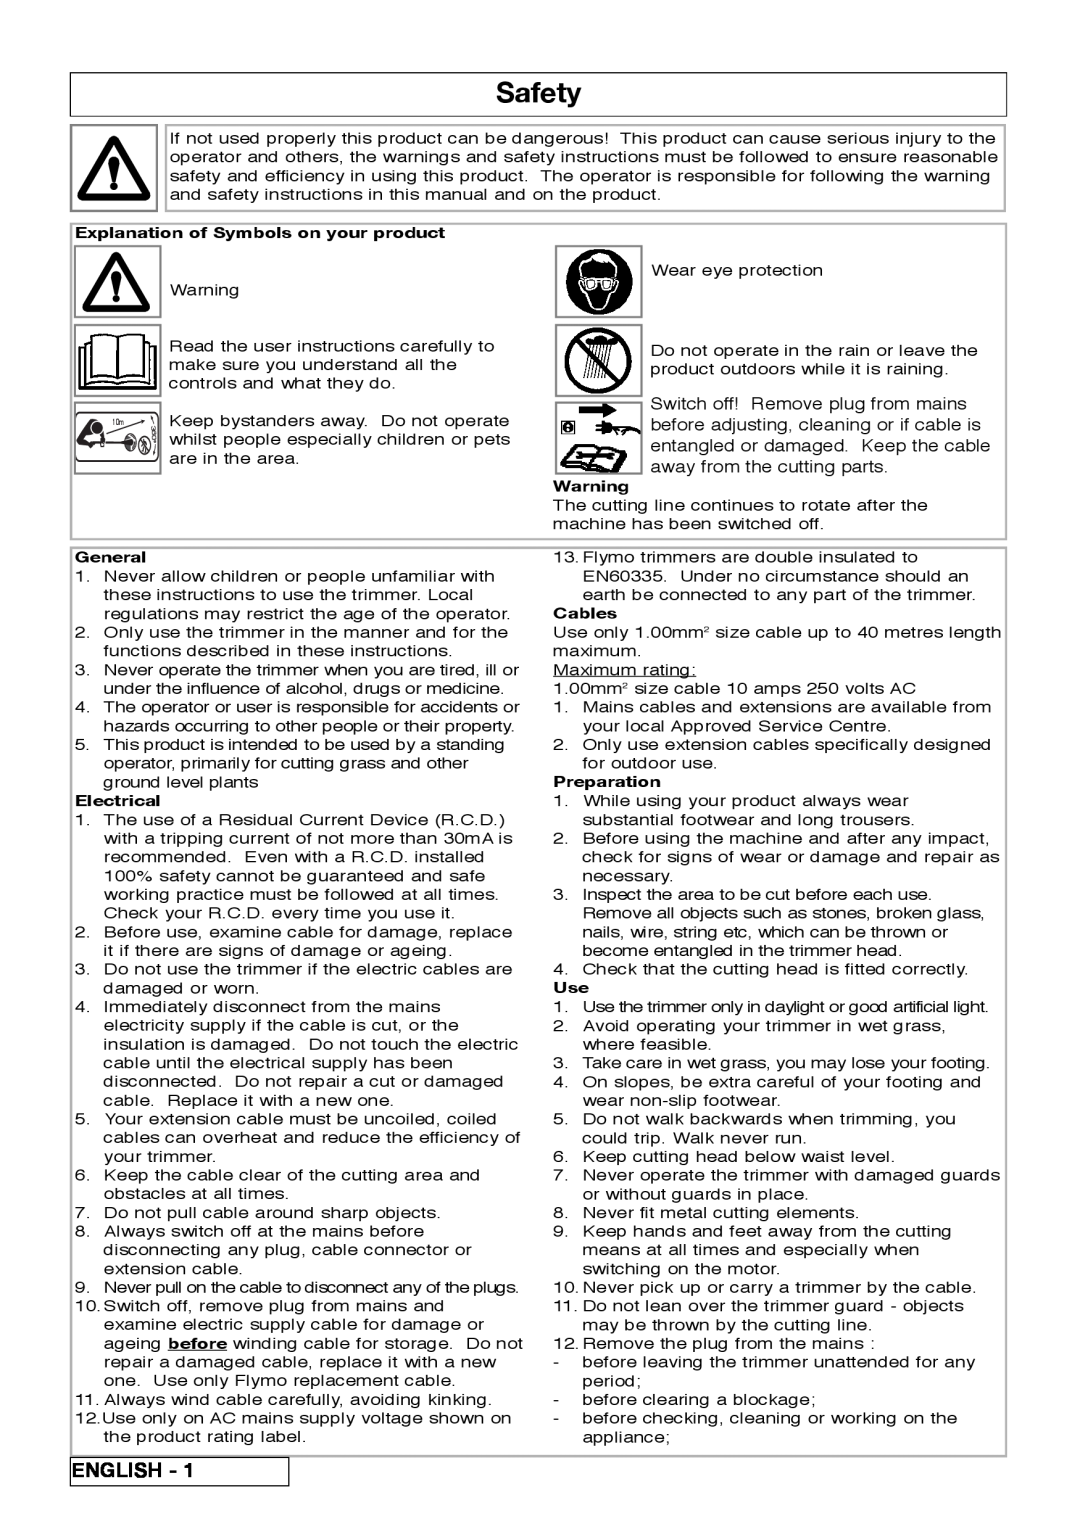 Flymo 800/1000 manual Safety, English, Explanation of Symbols on your product, General, Electrical, Cables, Preparation 